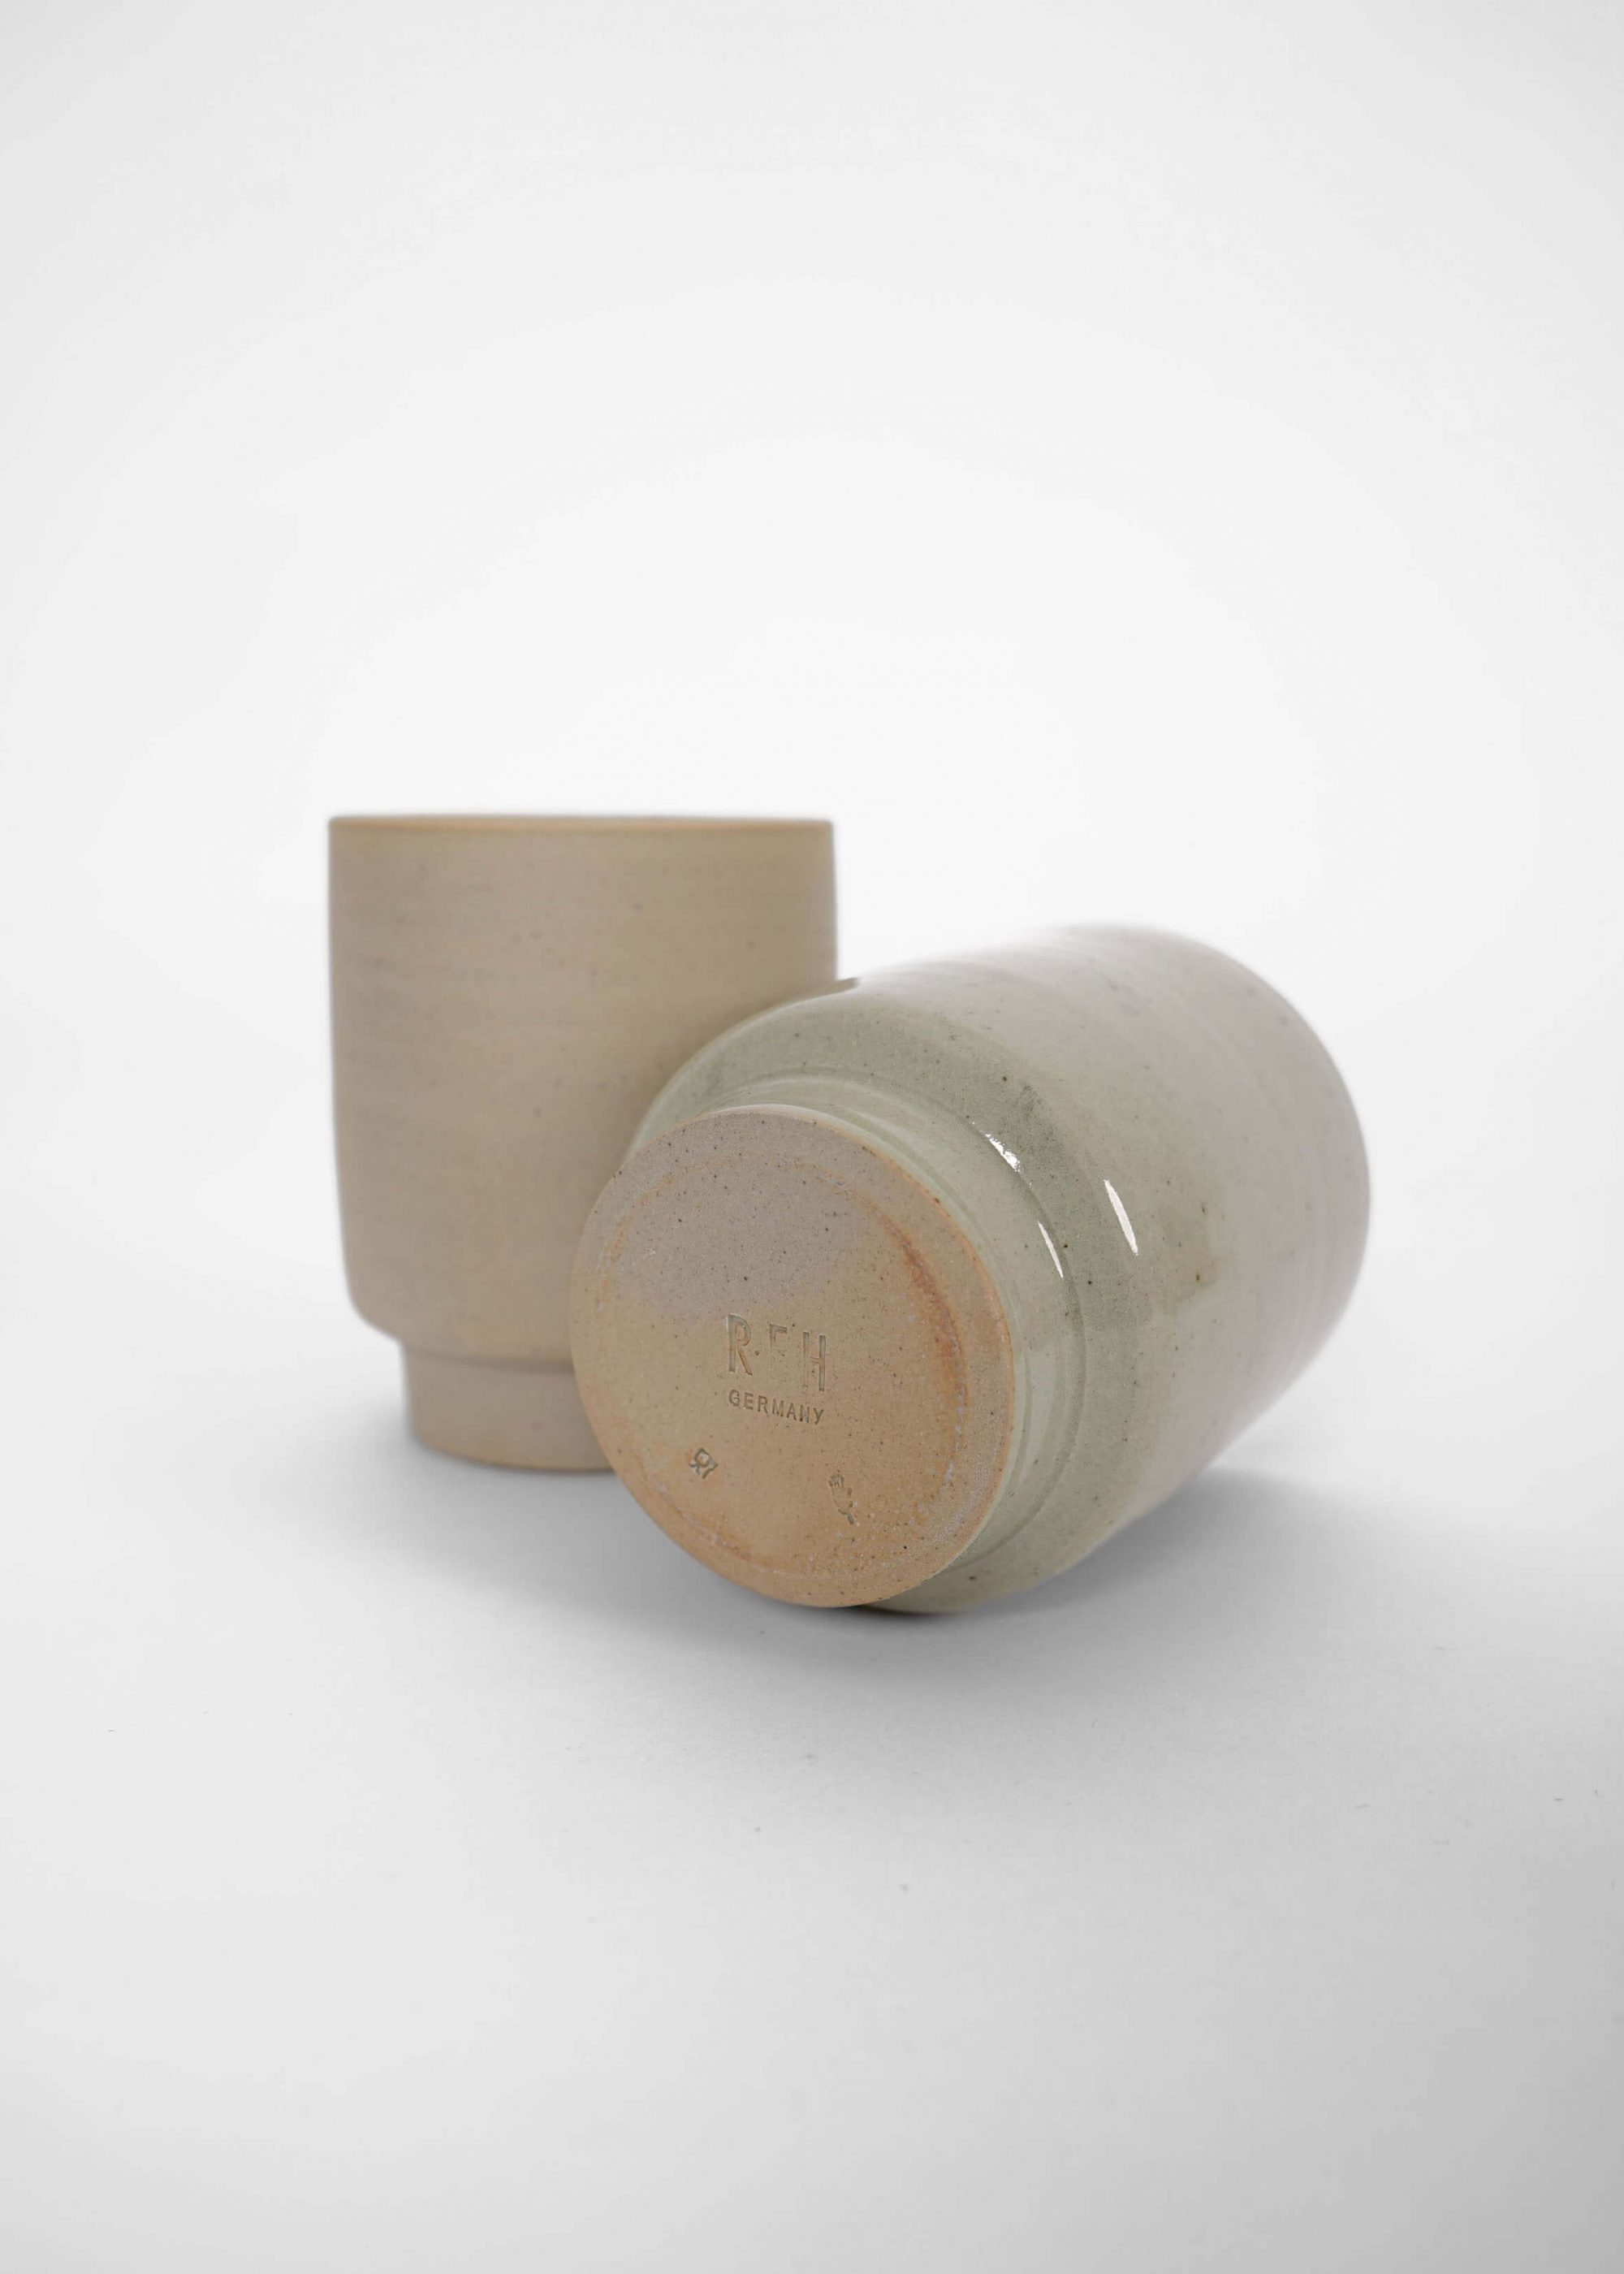 Product image for N° ICSA3 BEUYS + BRUTAL Cup Set